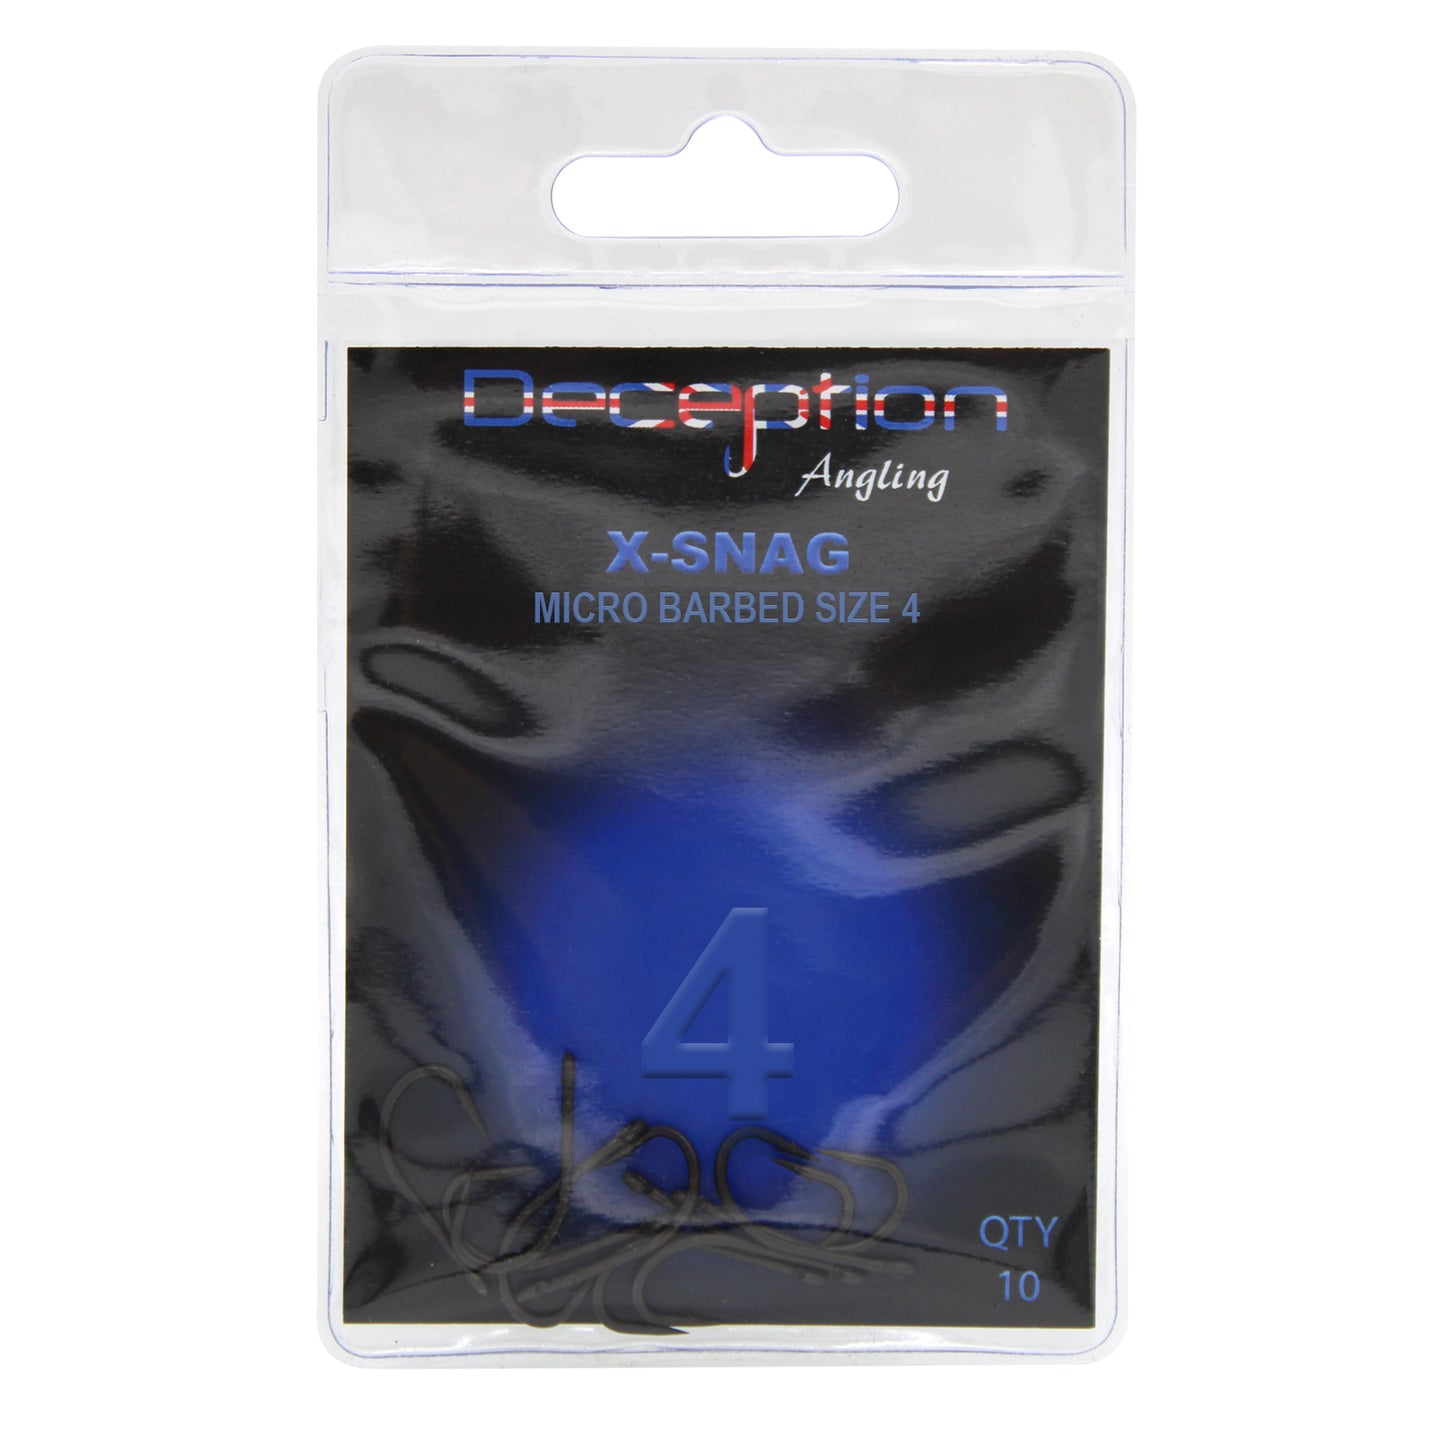 Deception Angling X-Snag Micro Barbed Fishing Hooks Size 4 Pack of 10